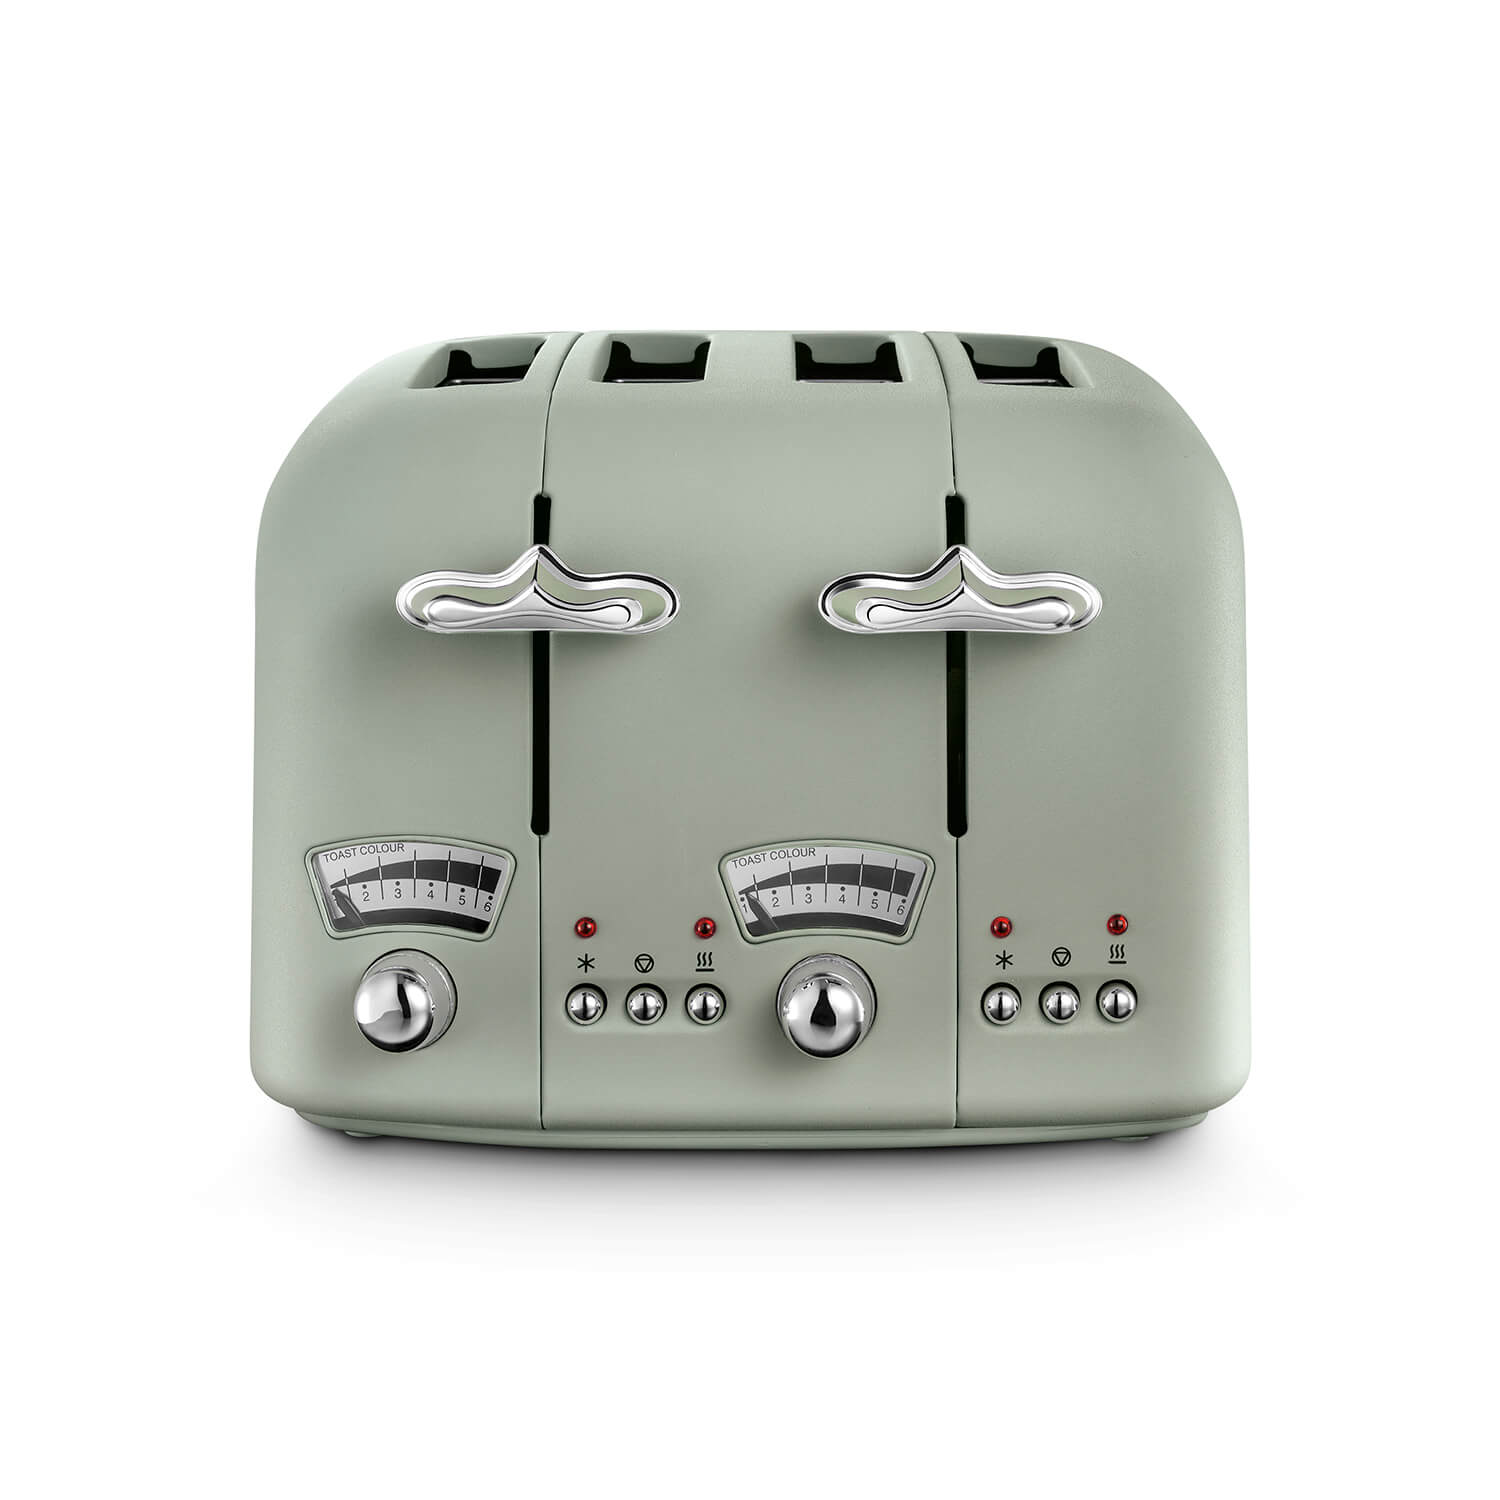 Delonghi 4-Slice Toaster - Green | CT04GR 1 Shaws Department Stores